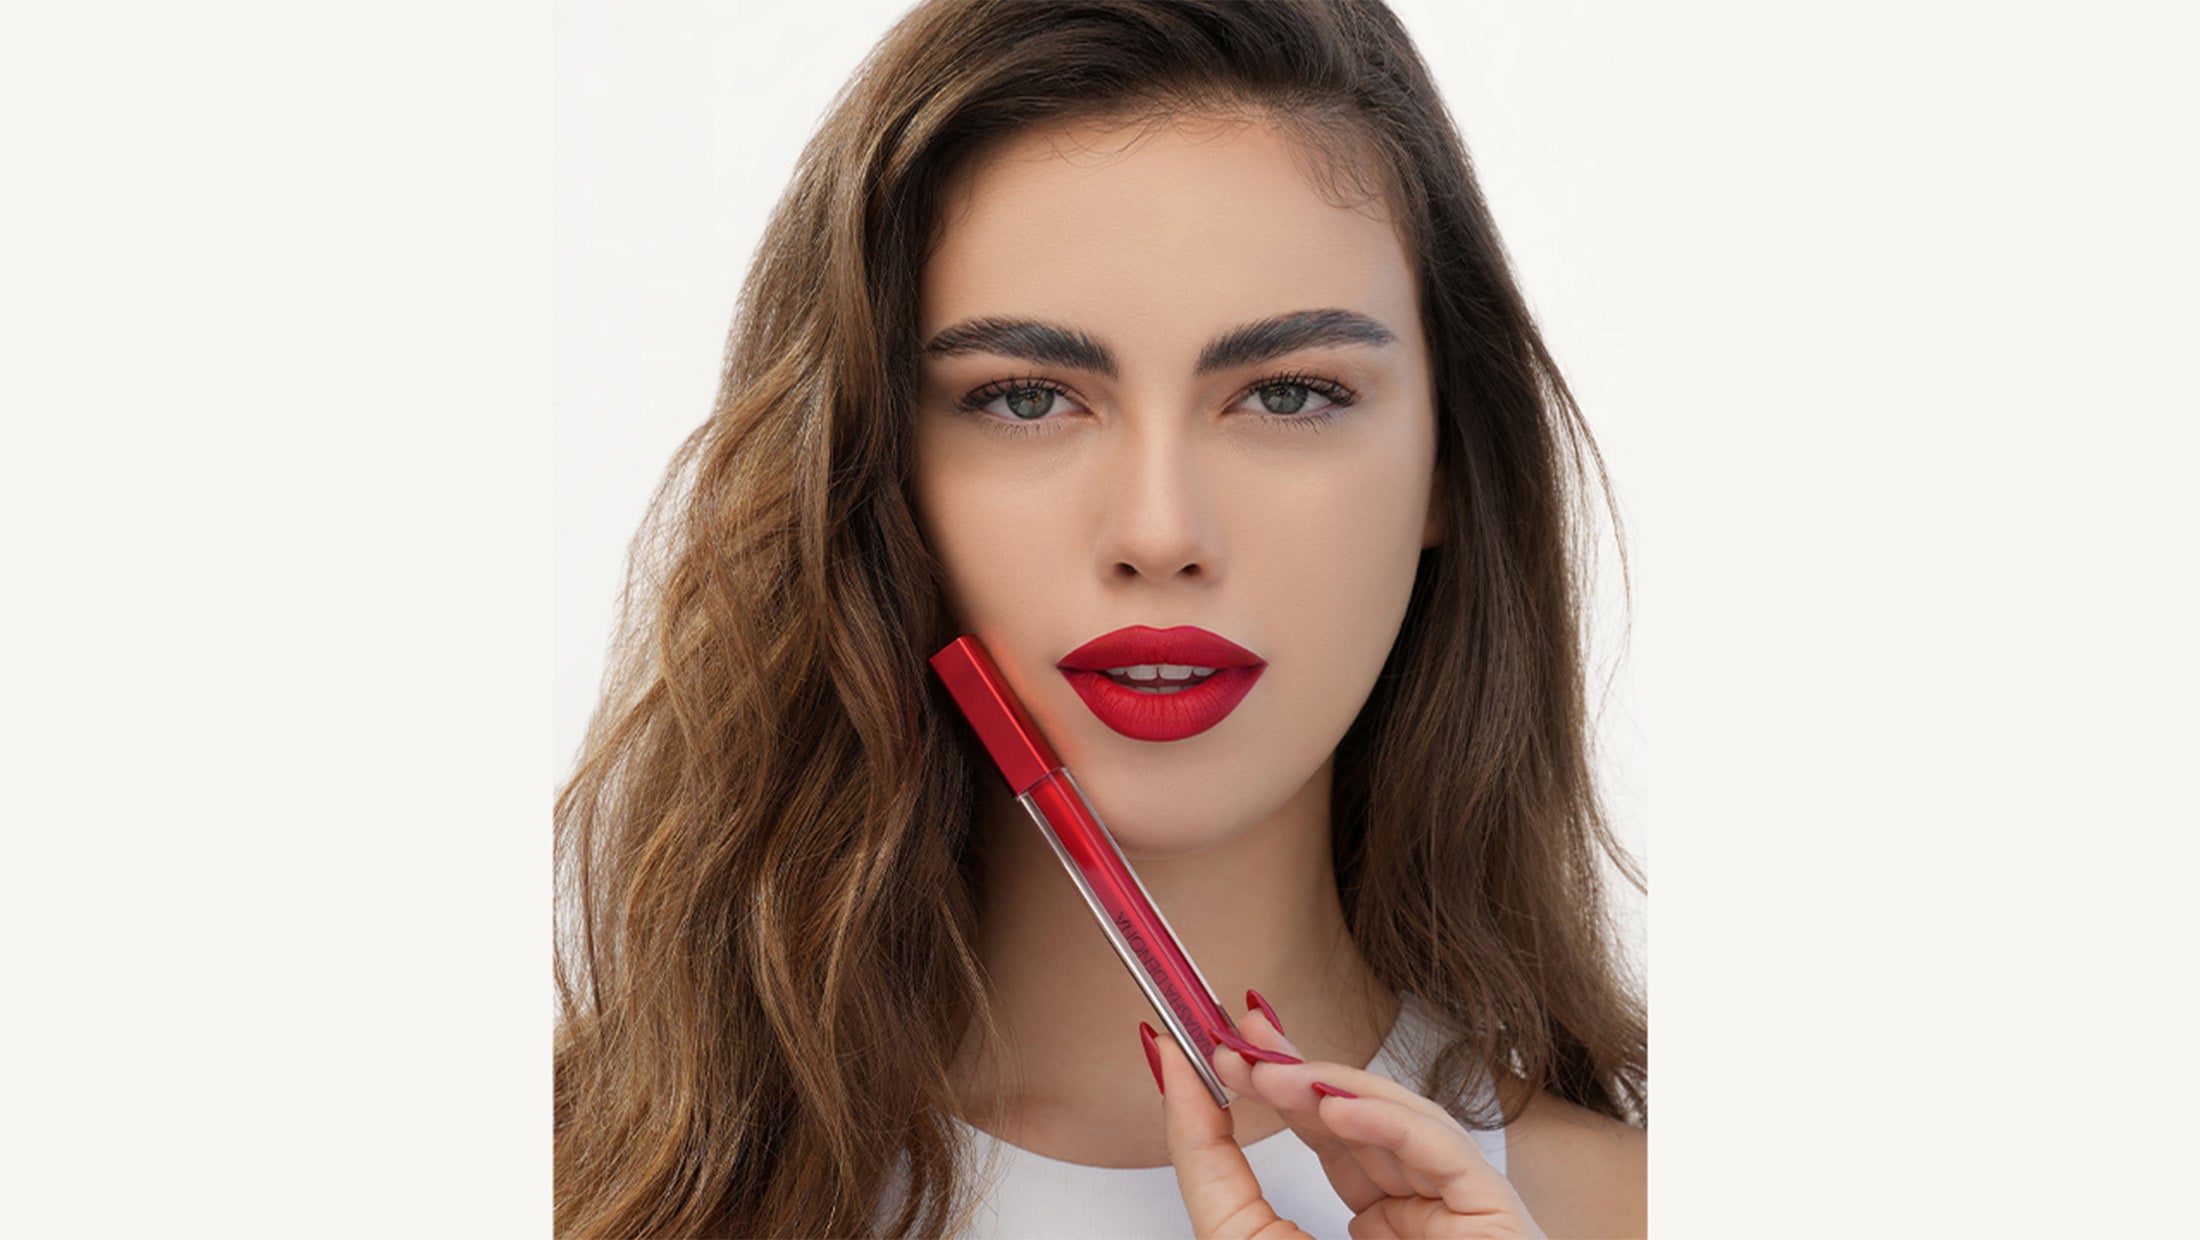 Introducing the I NEED A ROUGE MATTE LIQUID LIPSTICK in shade EVA!